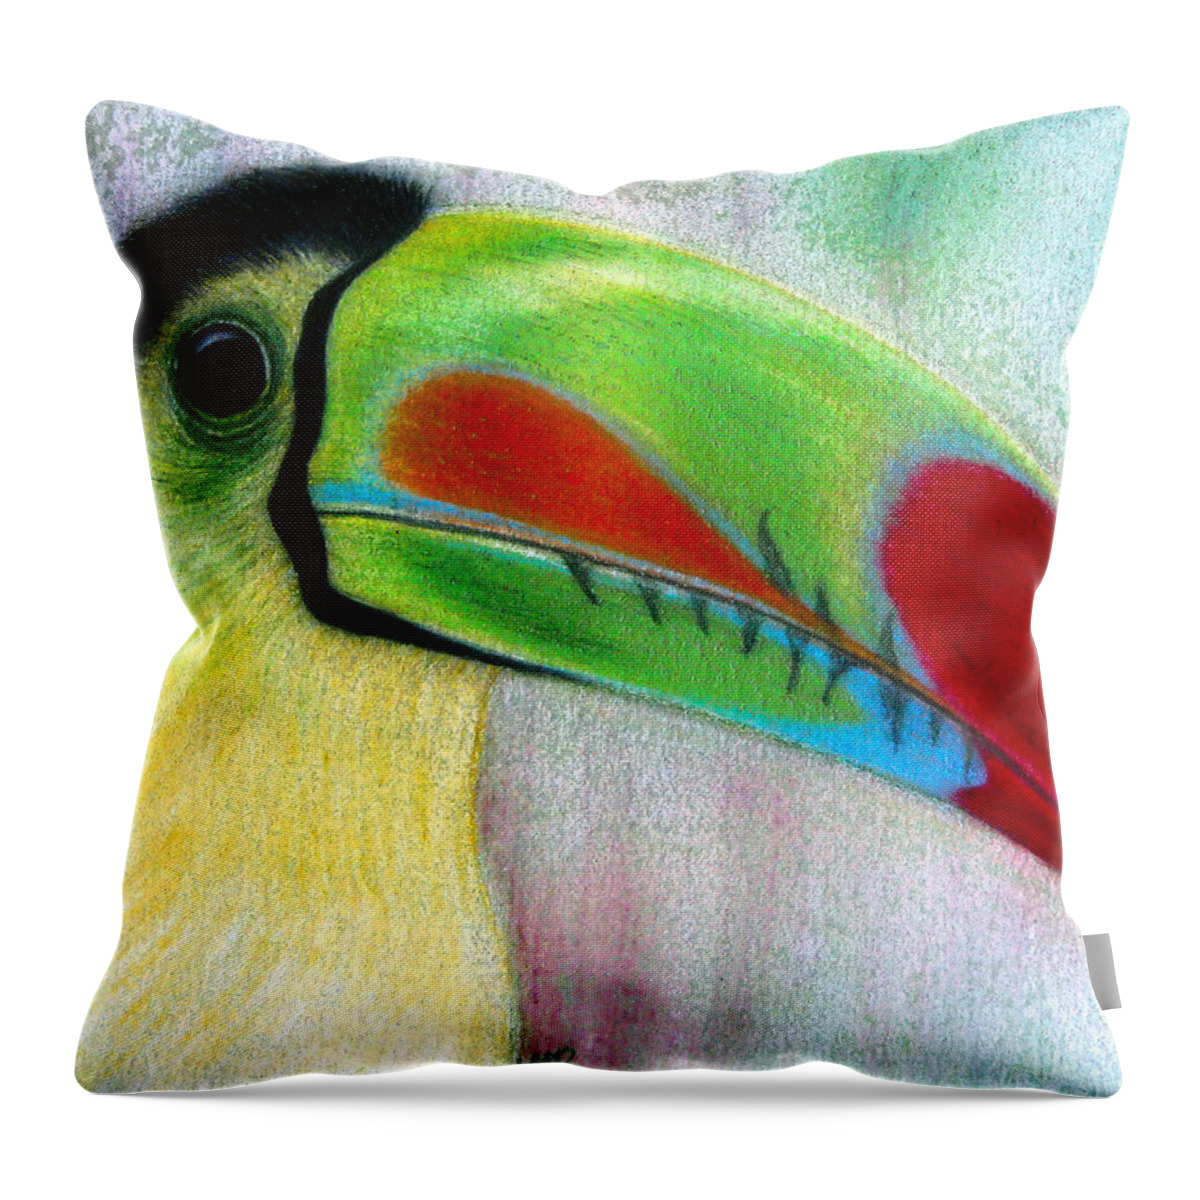 Toucan Throw Pillow featuring the drawing Toucan by Jo Prevost